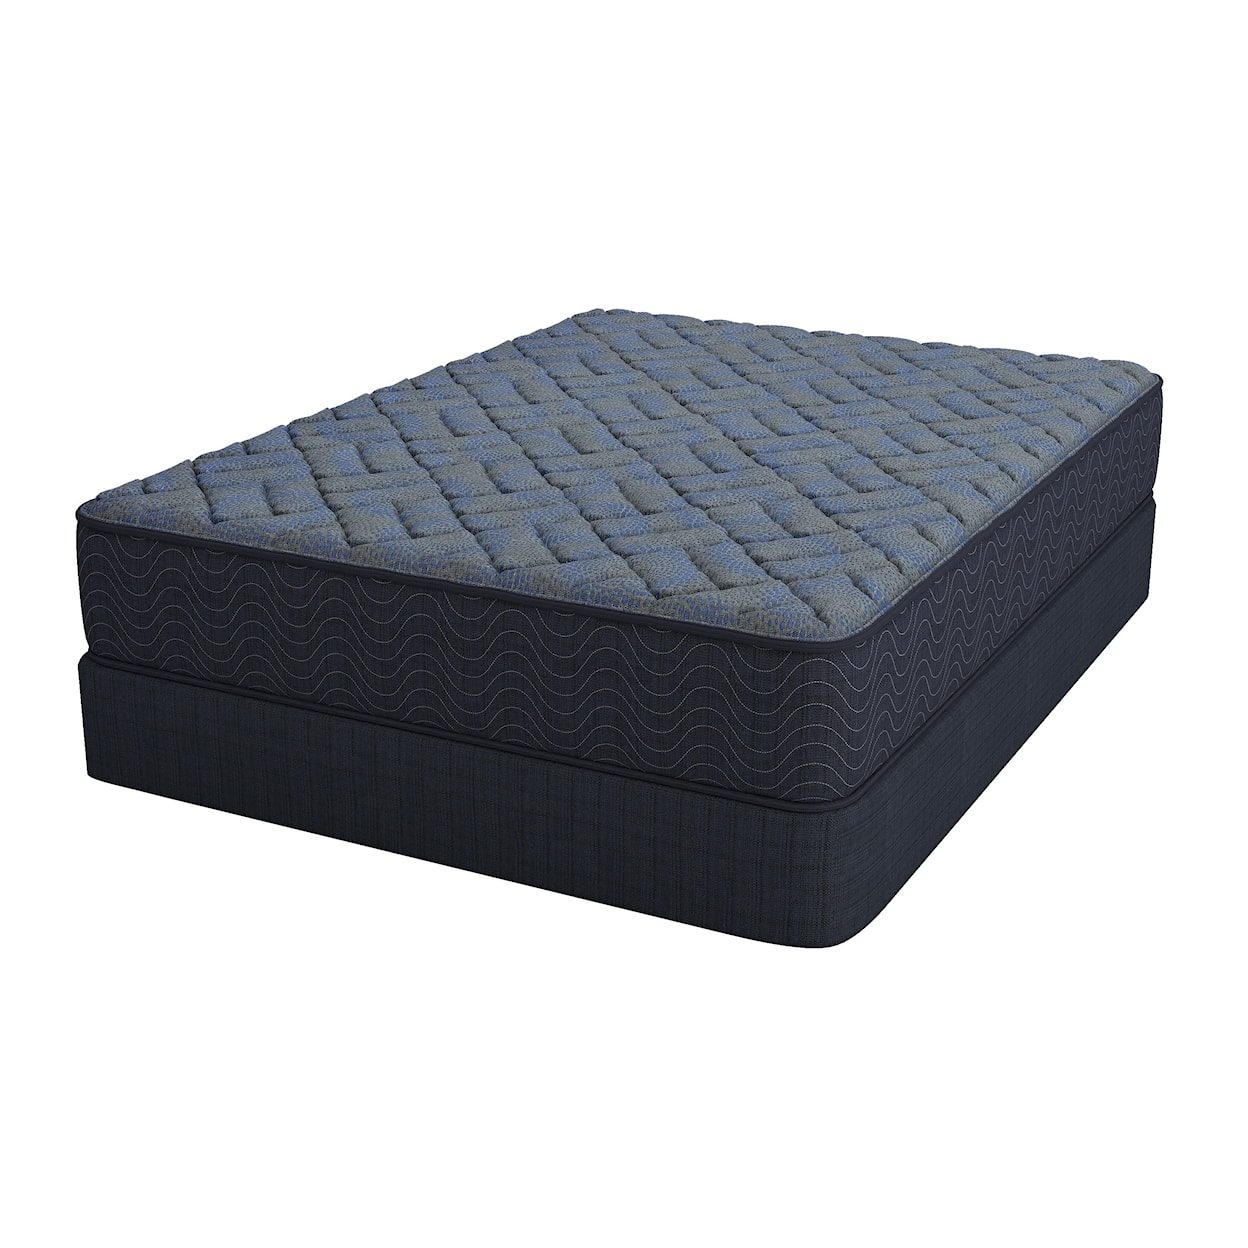 Southerland Bedding Co. Brantley Firm King Brantley Firm Mattress